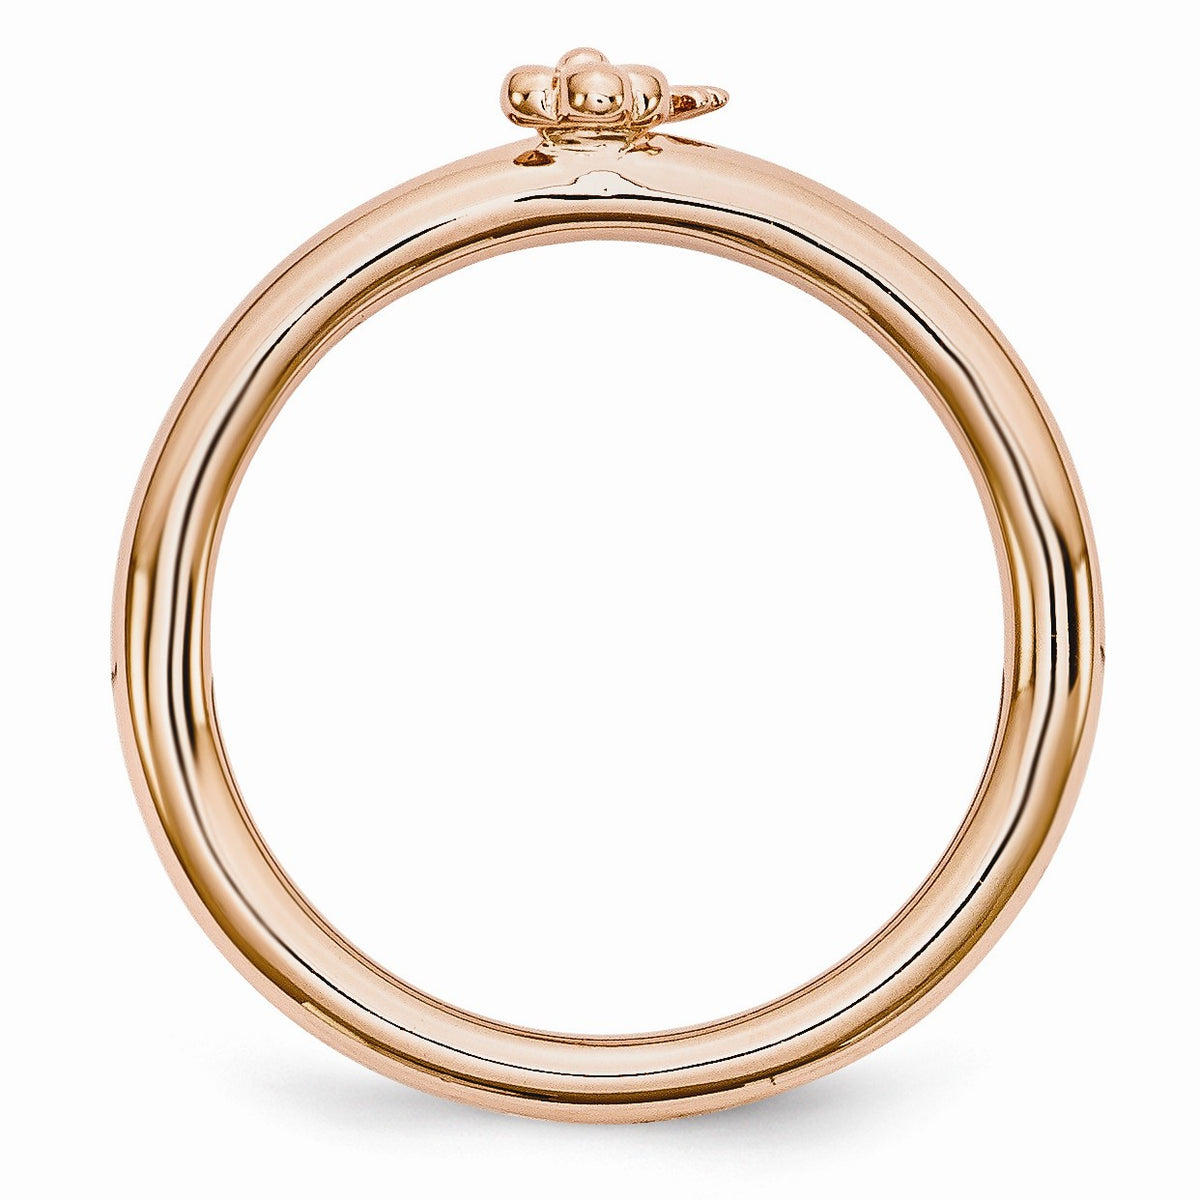 Alternate view of the Rose Gold Tone Plated Sterling Silver Stackable 5mm Key Ring by The Black Bow Jewelry Co.